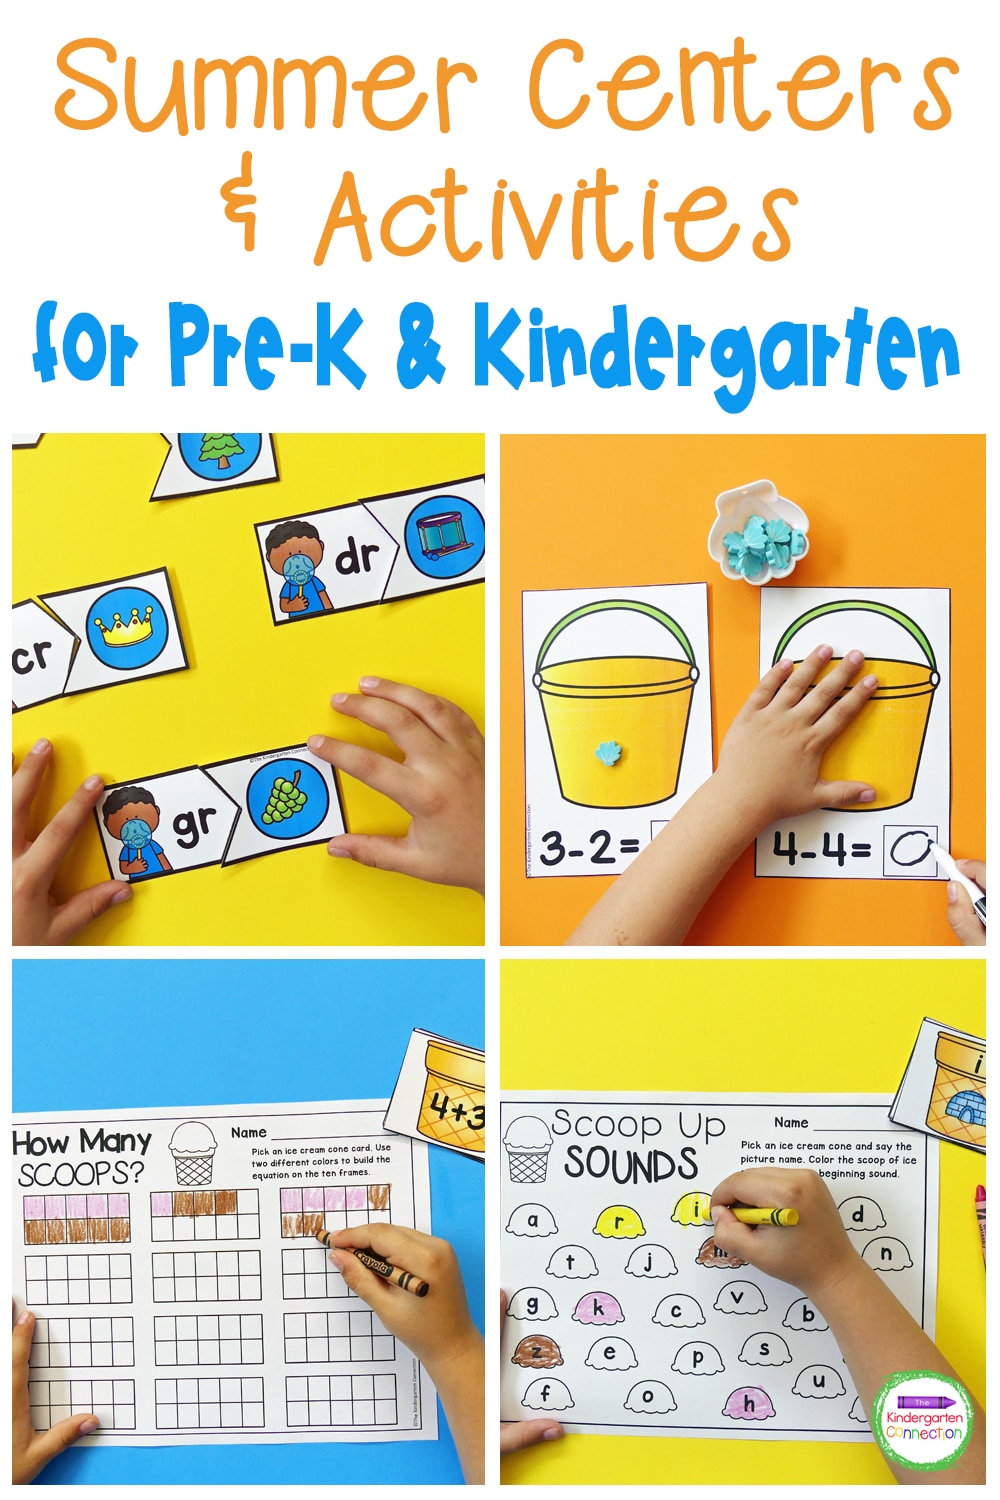 These Summer Centers and Activities for Pre-K & Kindergarten will incorporate some popular summer themes into your lessons!